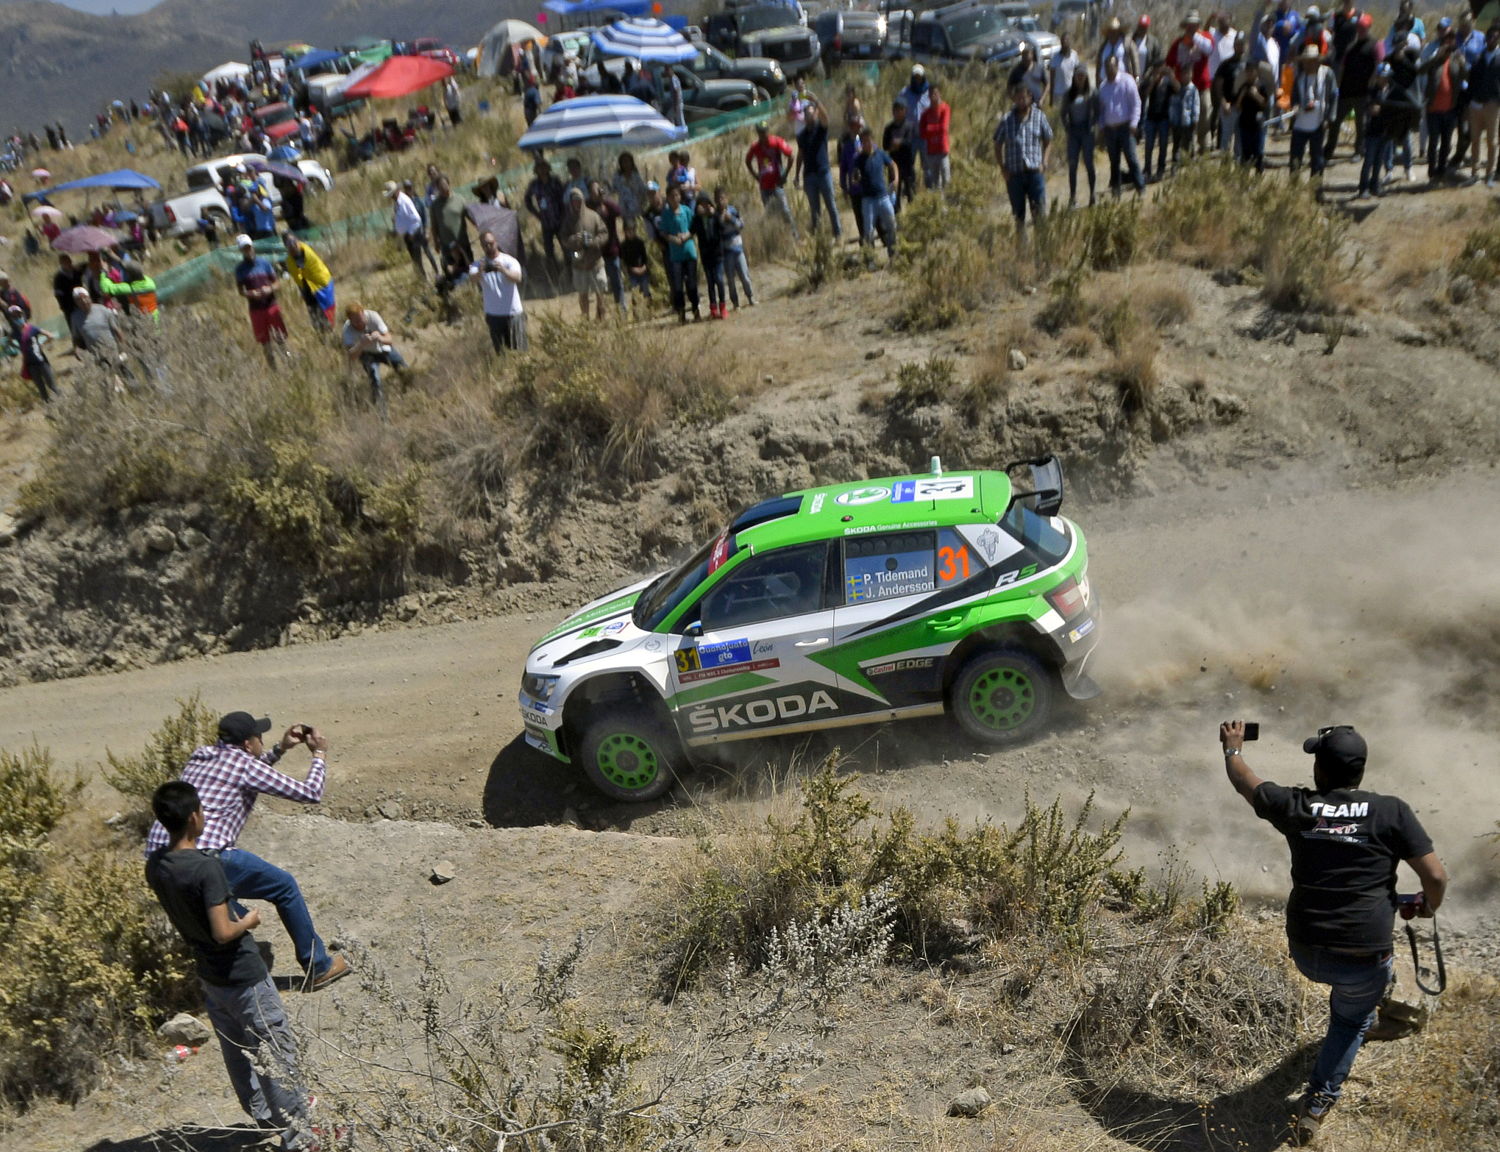 During the first two days, Pontus Tidemand/Jonas Andersson (SWE/SWE), driving a ŠKODA FABIA R5, set all fastest times of WRC 2, leading the category with a comfortable margin